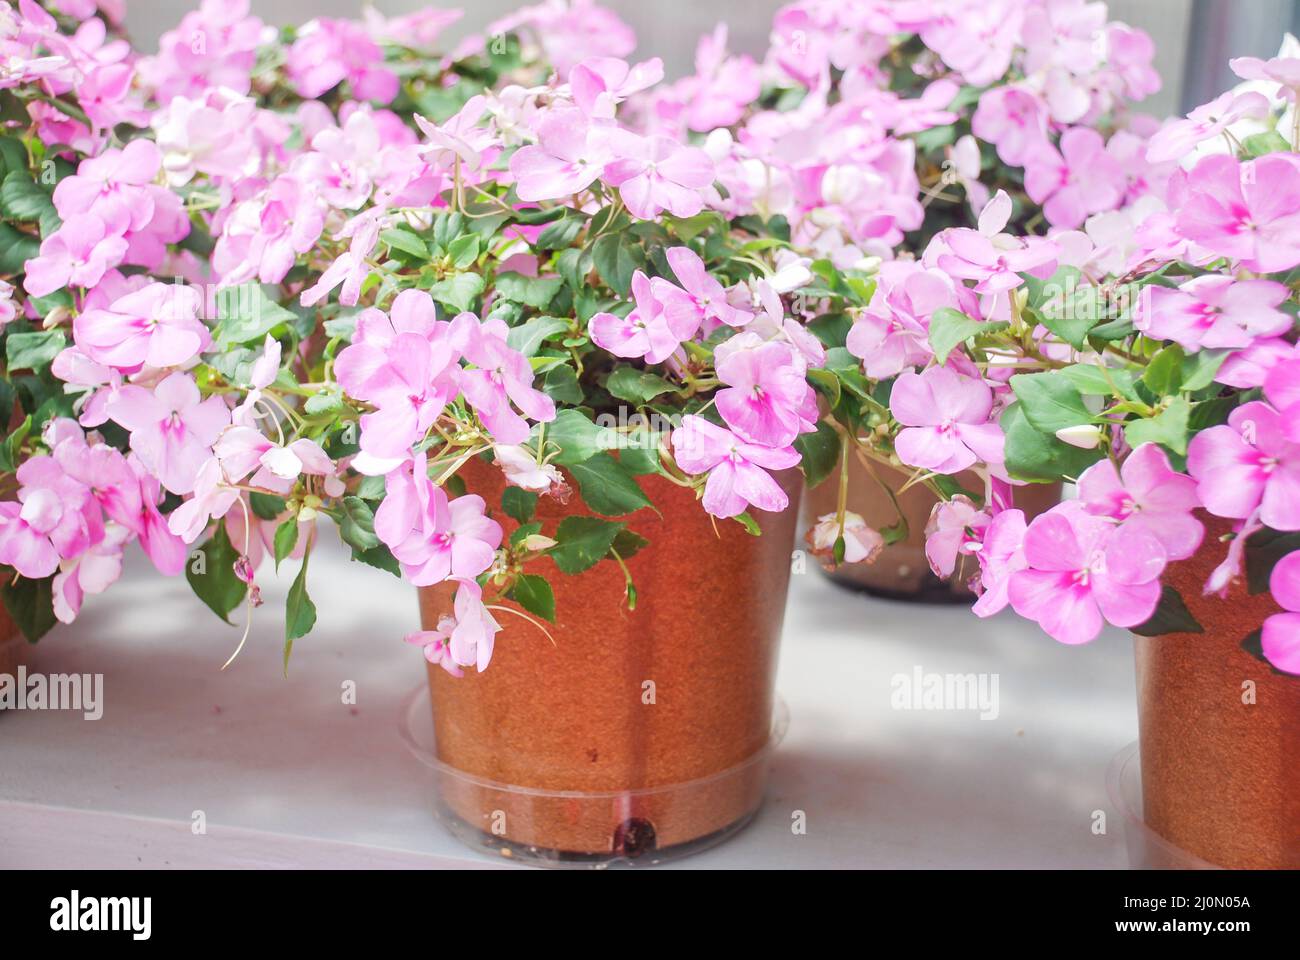 white impatiens in potted, scientific name Impatiens walleriana flowers also called Balsam, flower bed of blossoms in pink Stock Photo